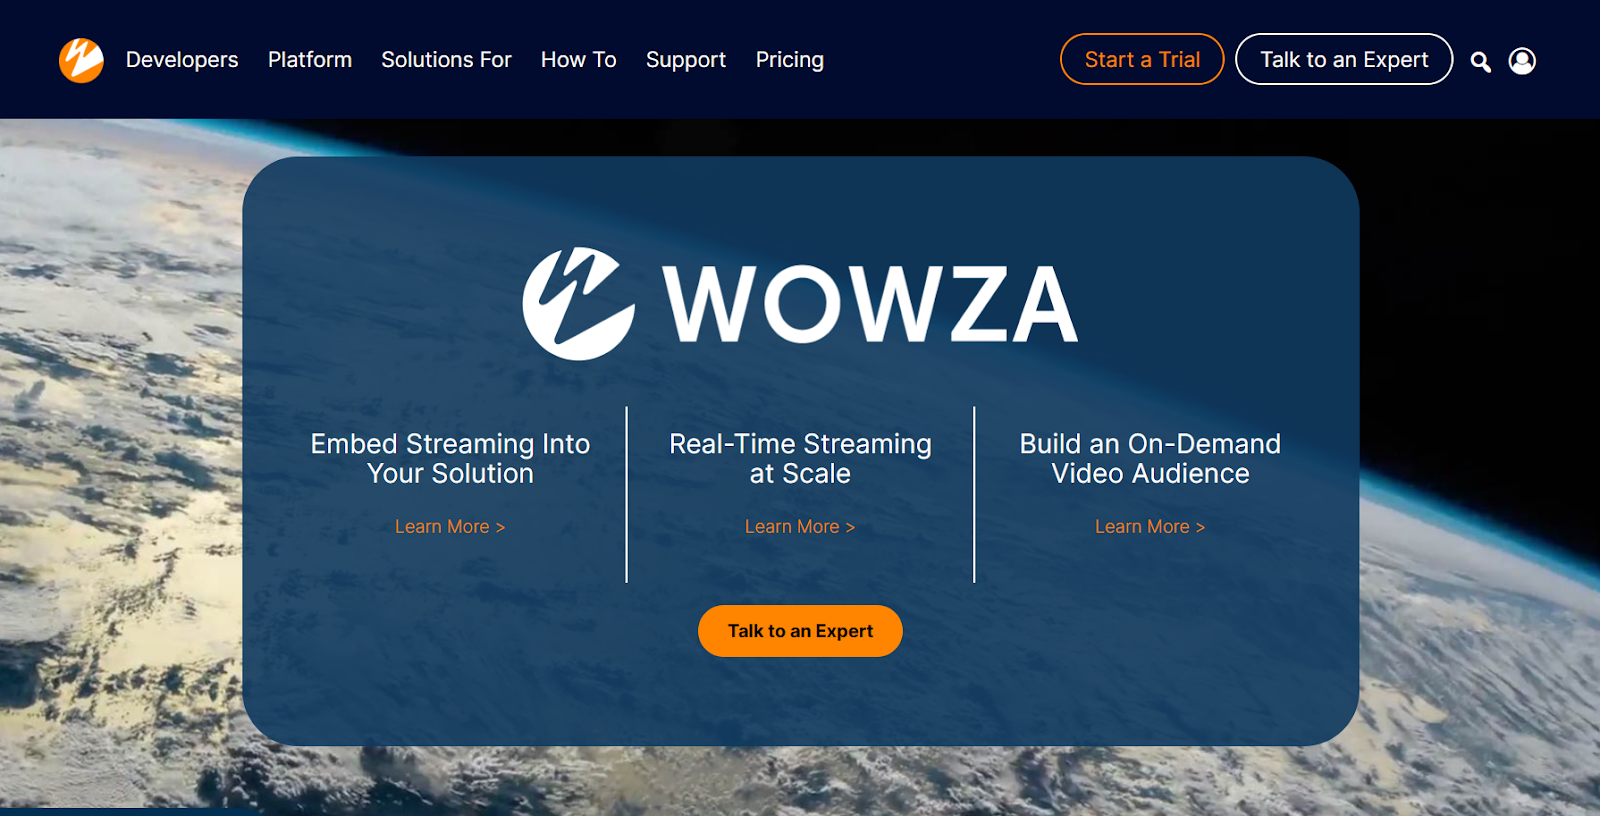 ott and best streaming services platform Wowza